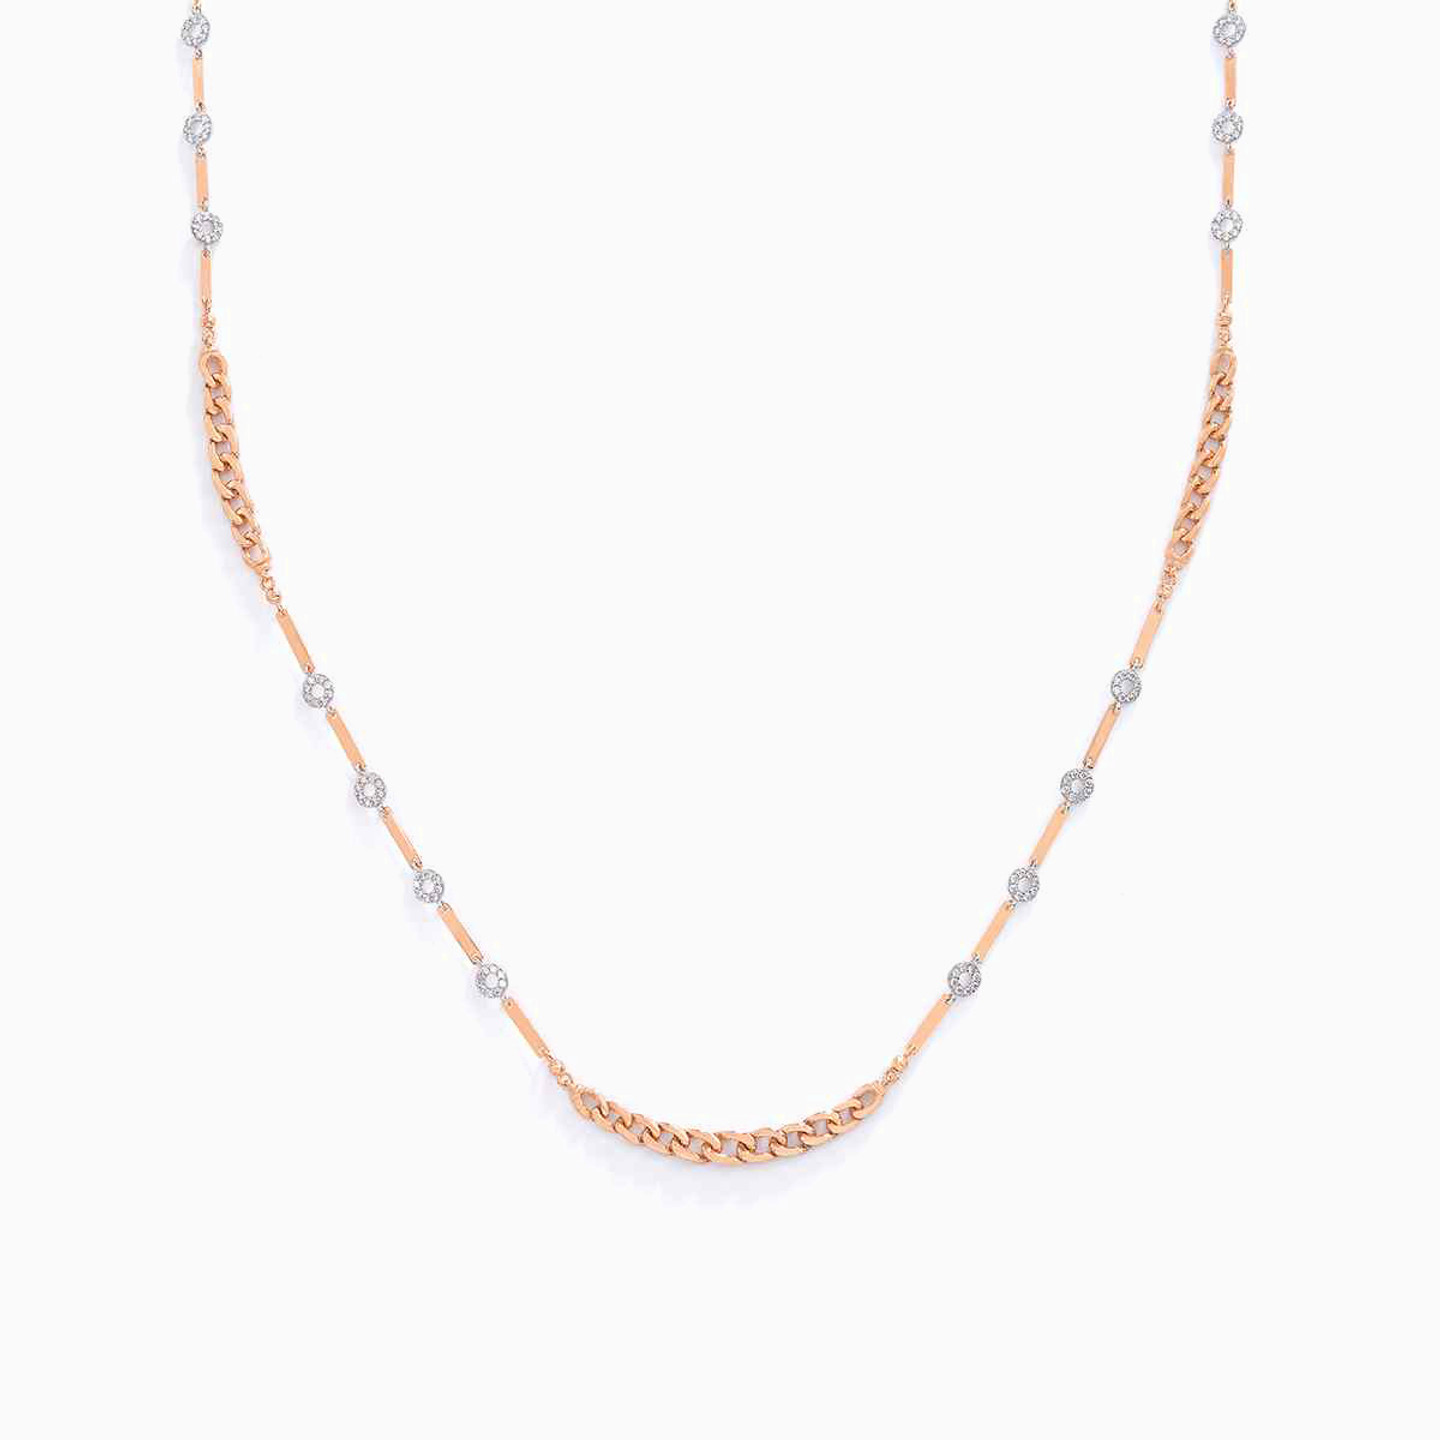 21K Gold Cubic Zirconia Chain Necklace - 3